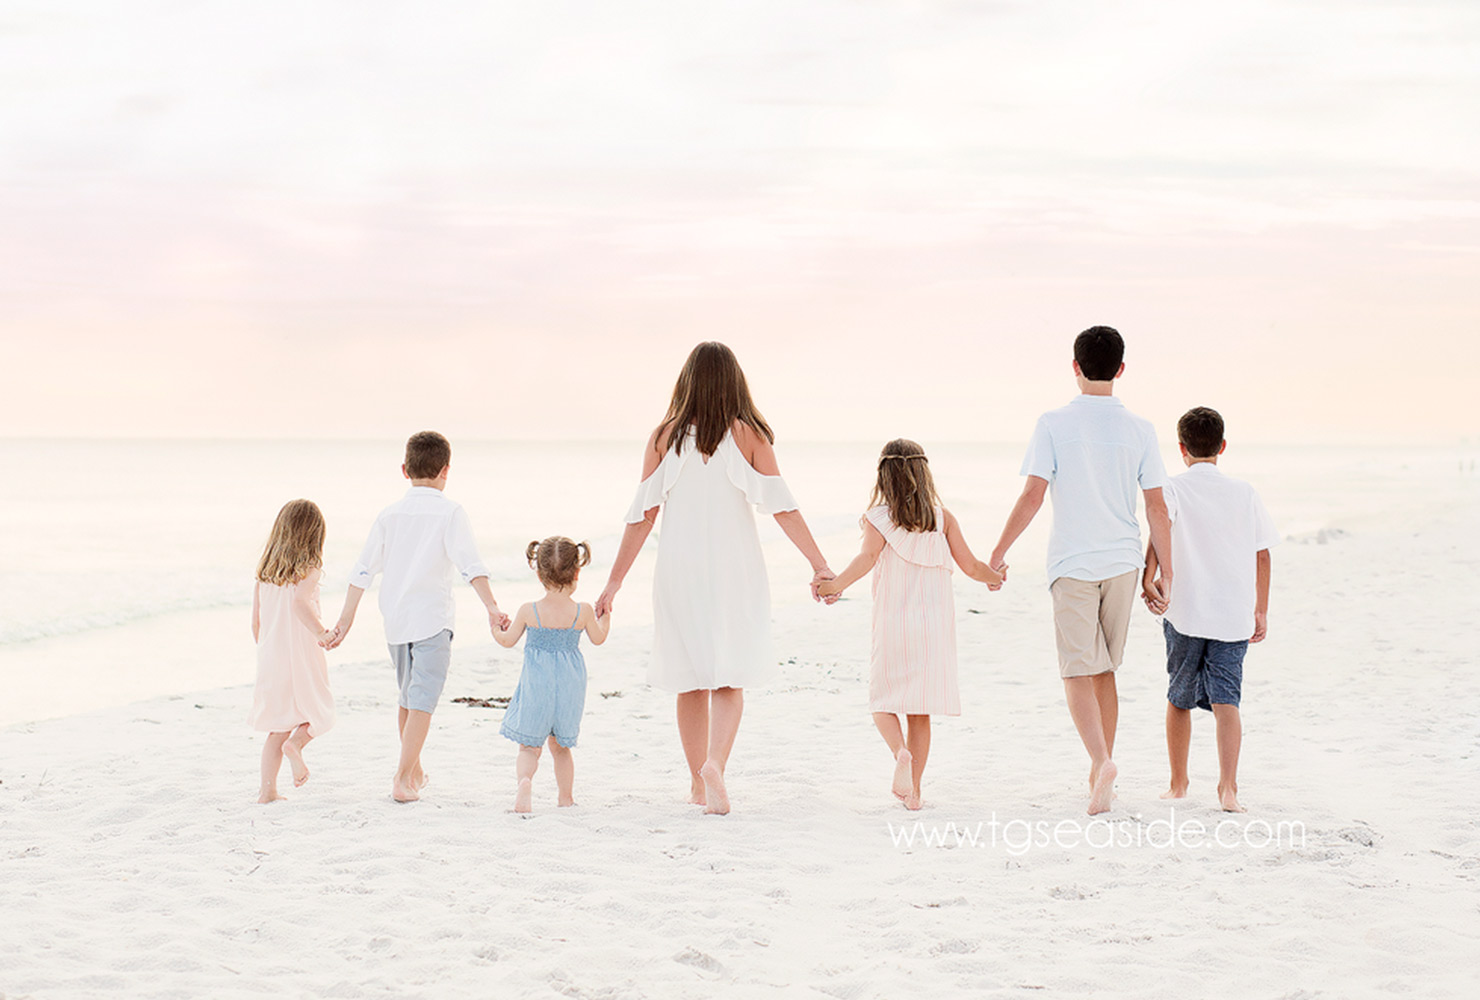 sibling photo ideas family holding hands beach